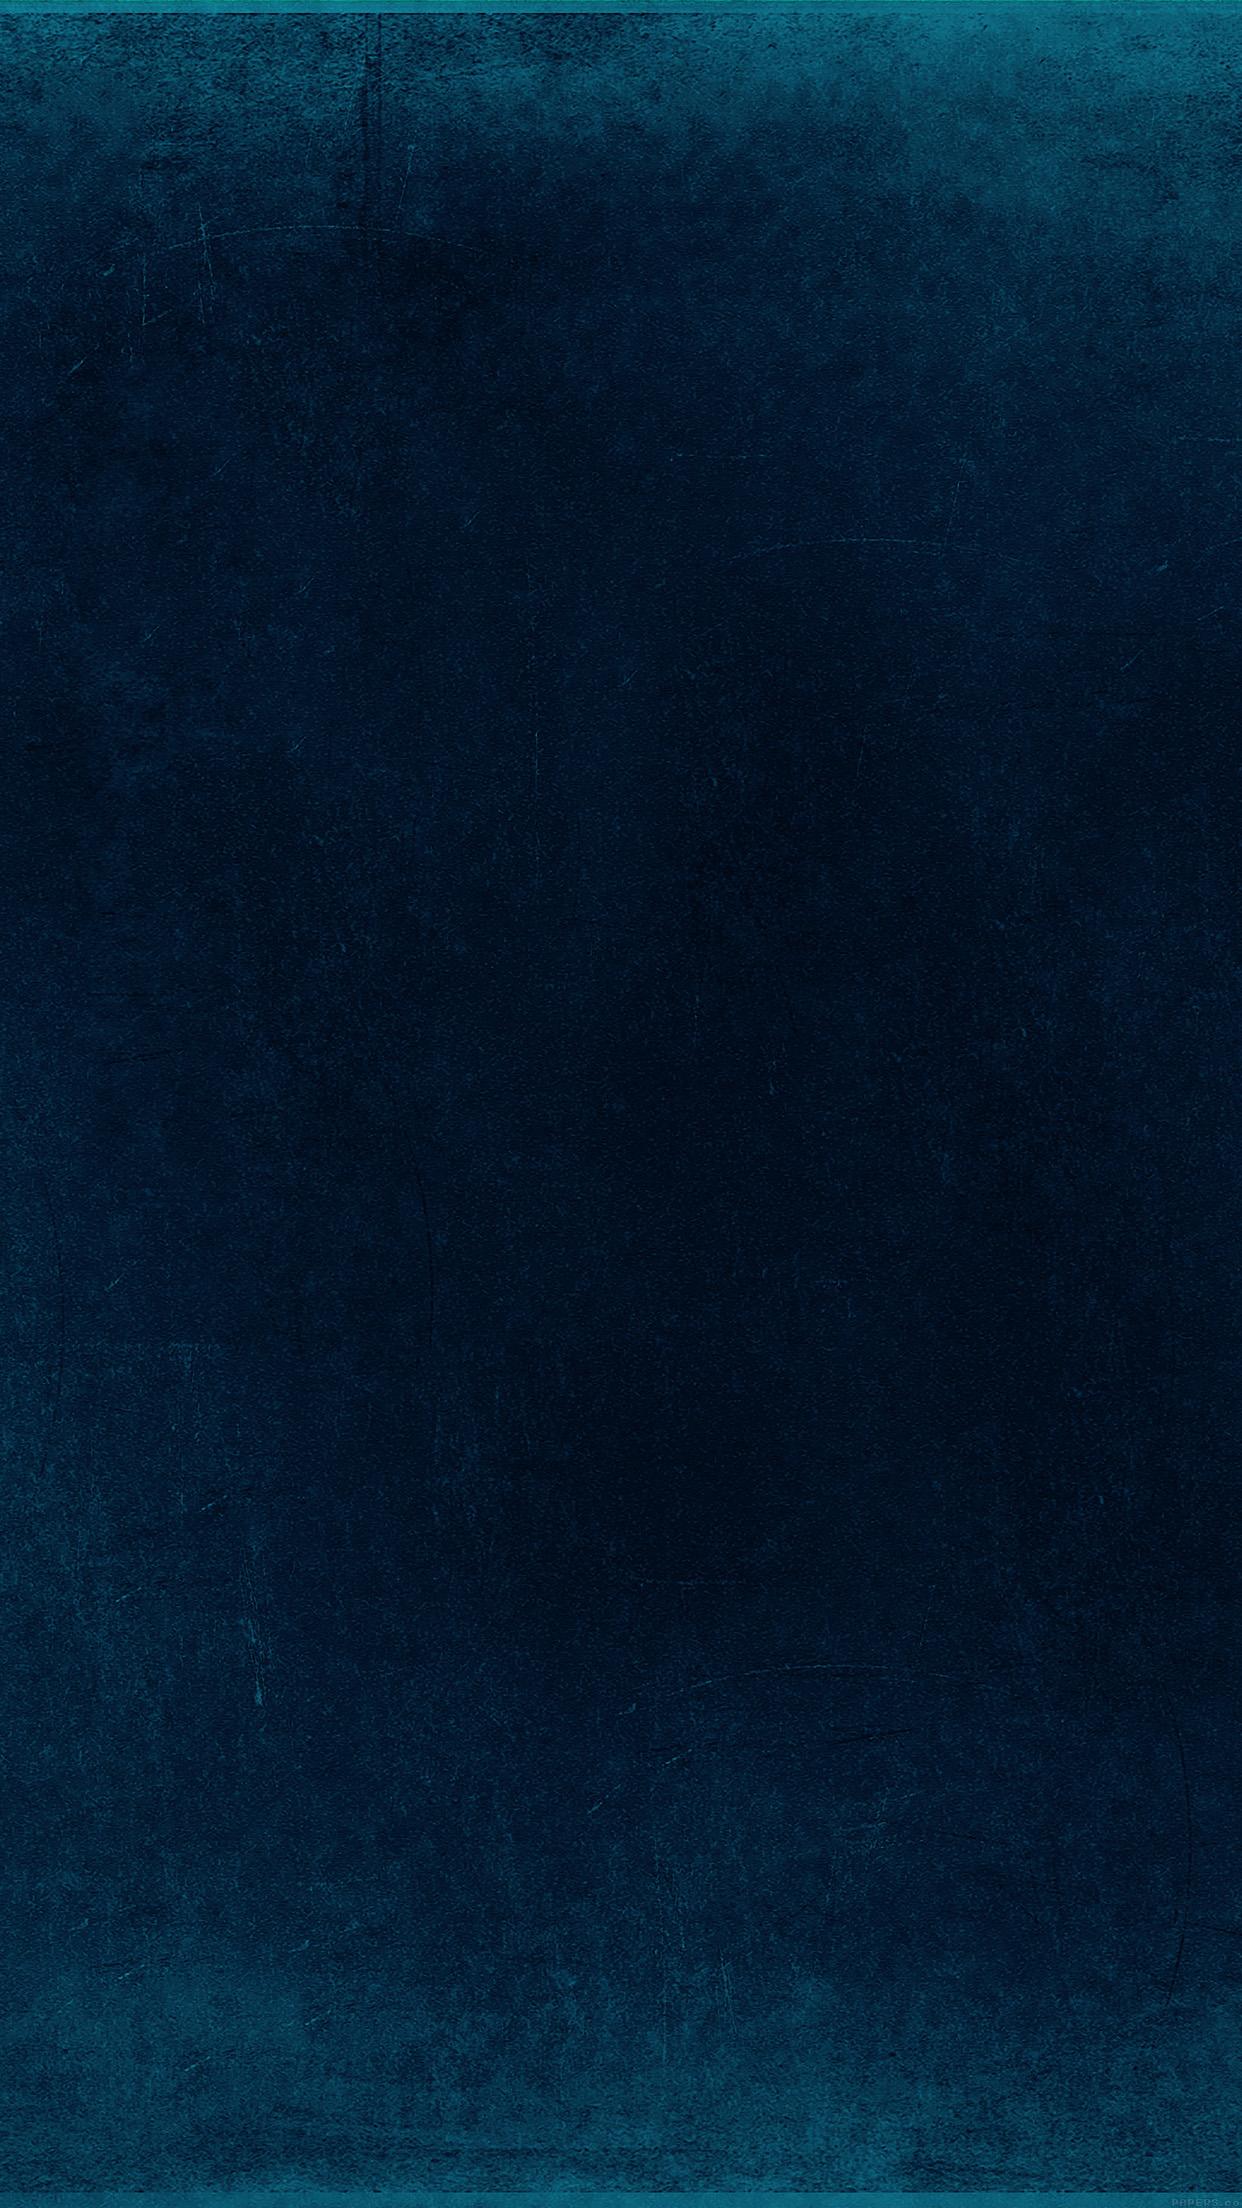  Widescreen Blue Texture Awesome Art   iPhone 6s Plus Wallpaper 1242x2208